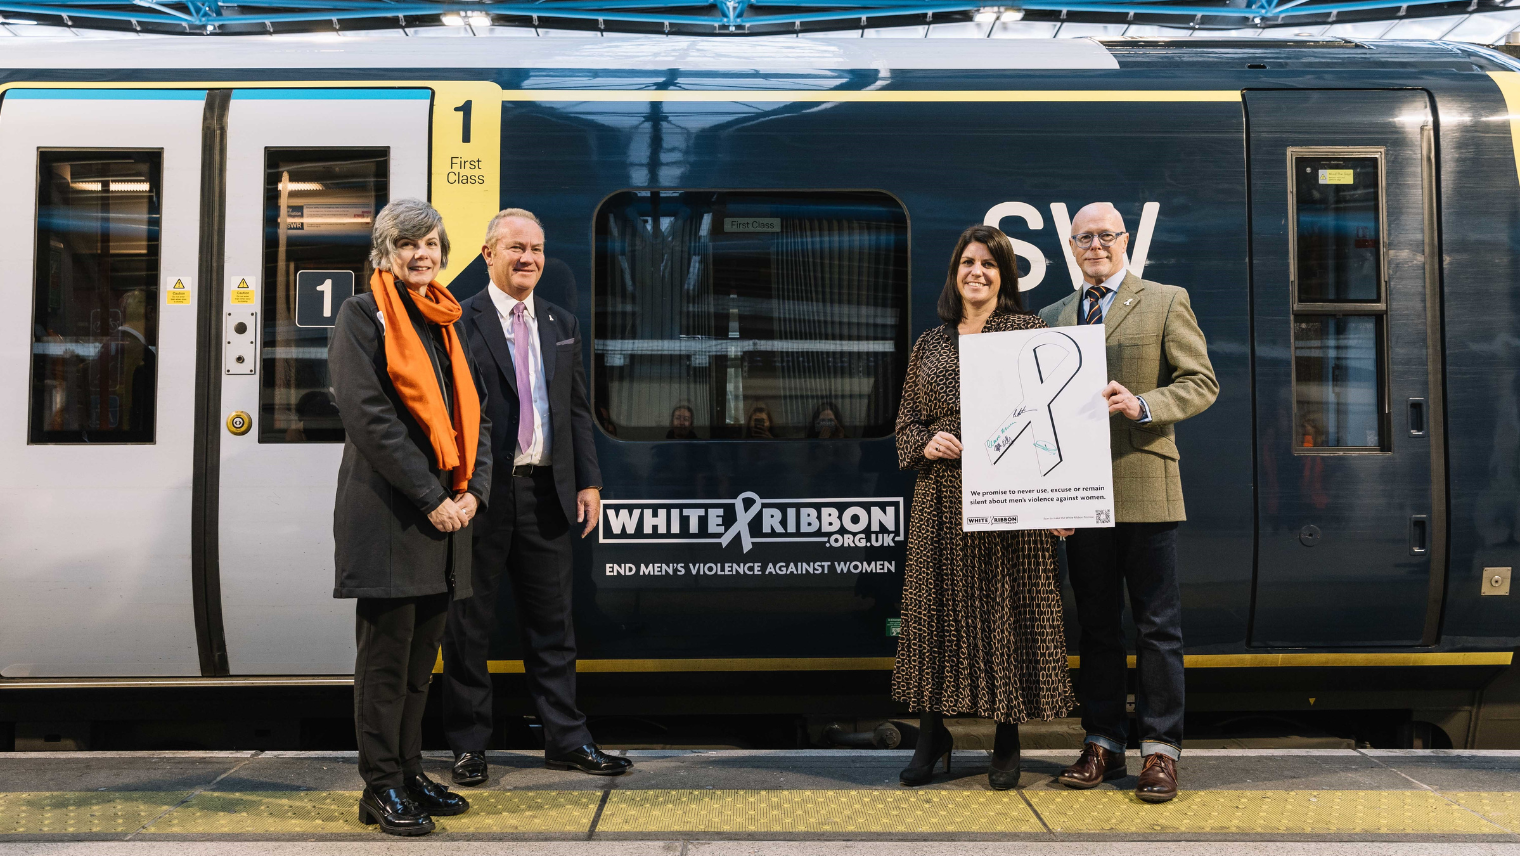 Our Managing Director, Claire Mann (second from right),  joined by The Chief Executive of White Ribbon UK, Anthea Sully (left), the Managing Director of the Department for Transport, Peter Wilkinson (right), and Assistant Chief Constable of the British Transport Police, Charlie Doyle (second from left).